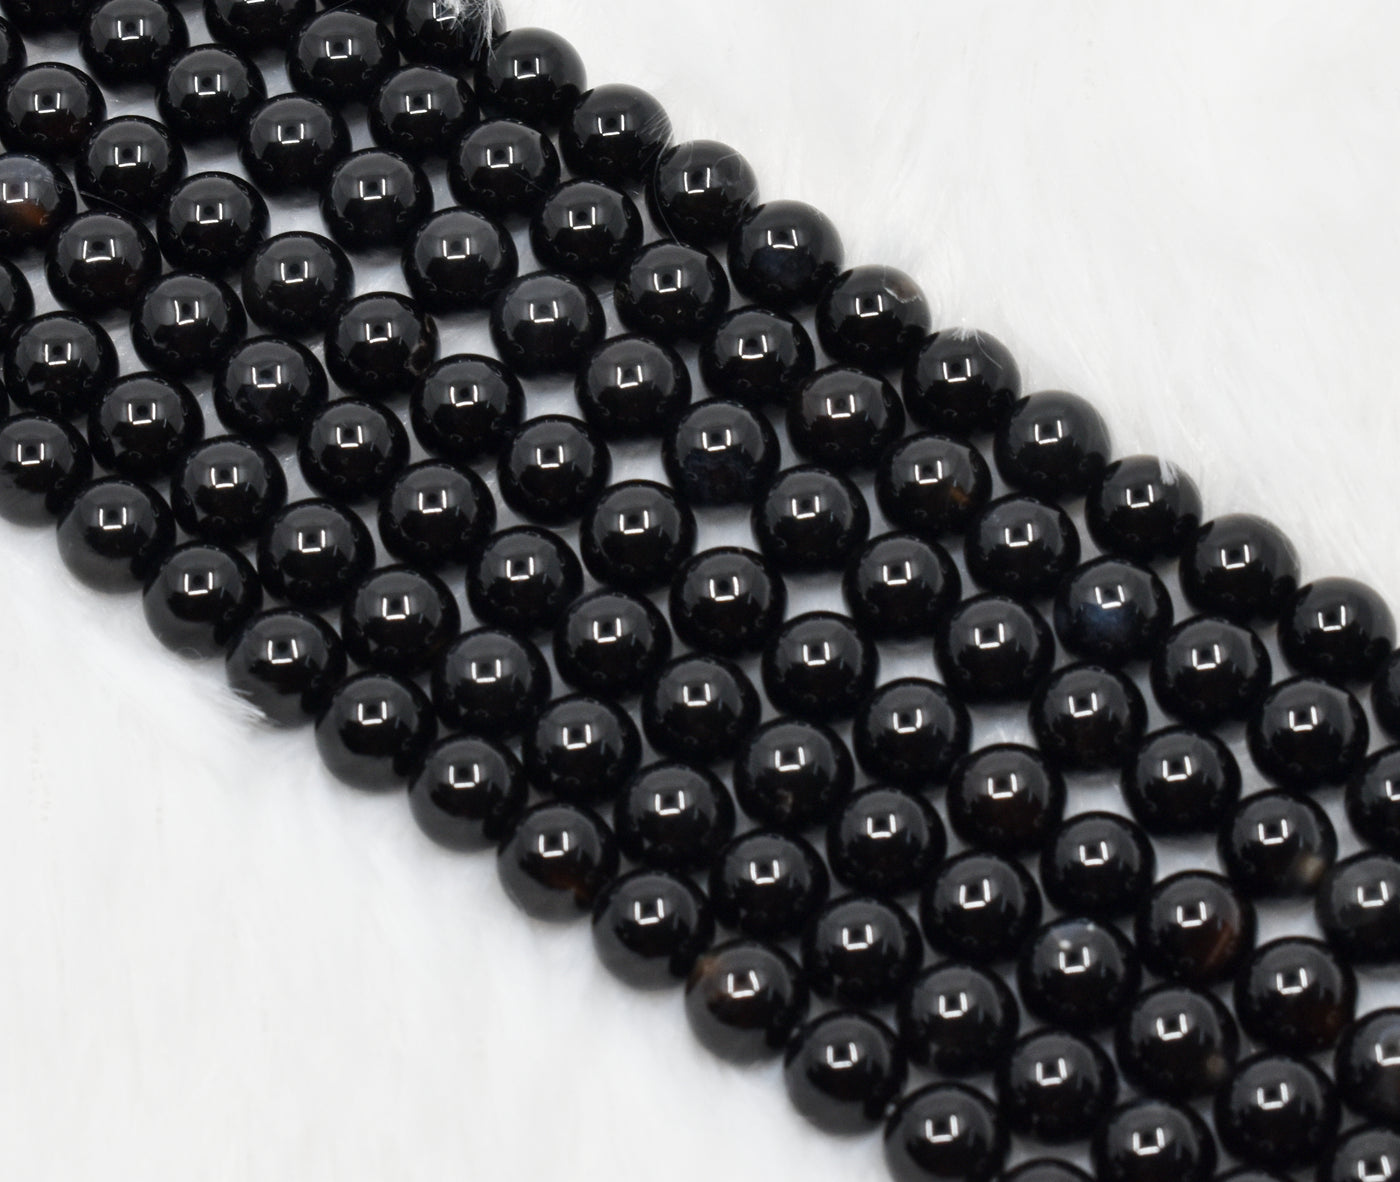 Black Onyx Beads, Natural Crystal Round Beads 4mm to 16mm